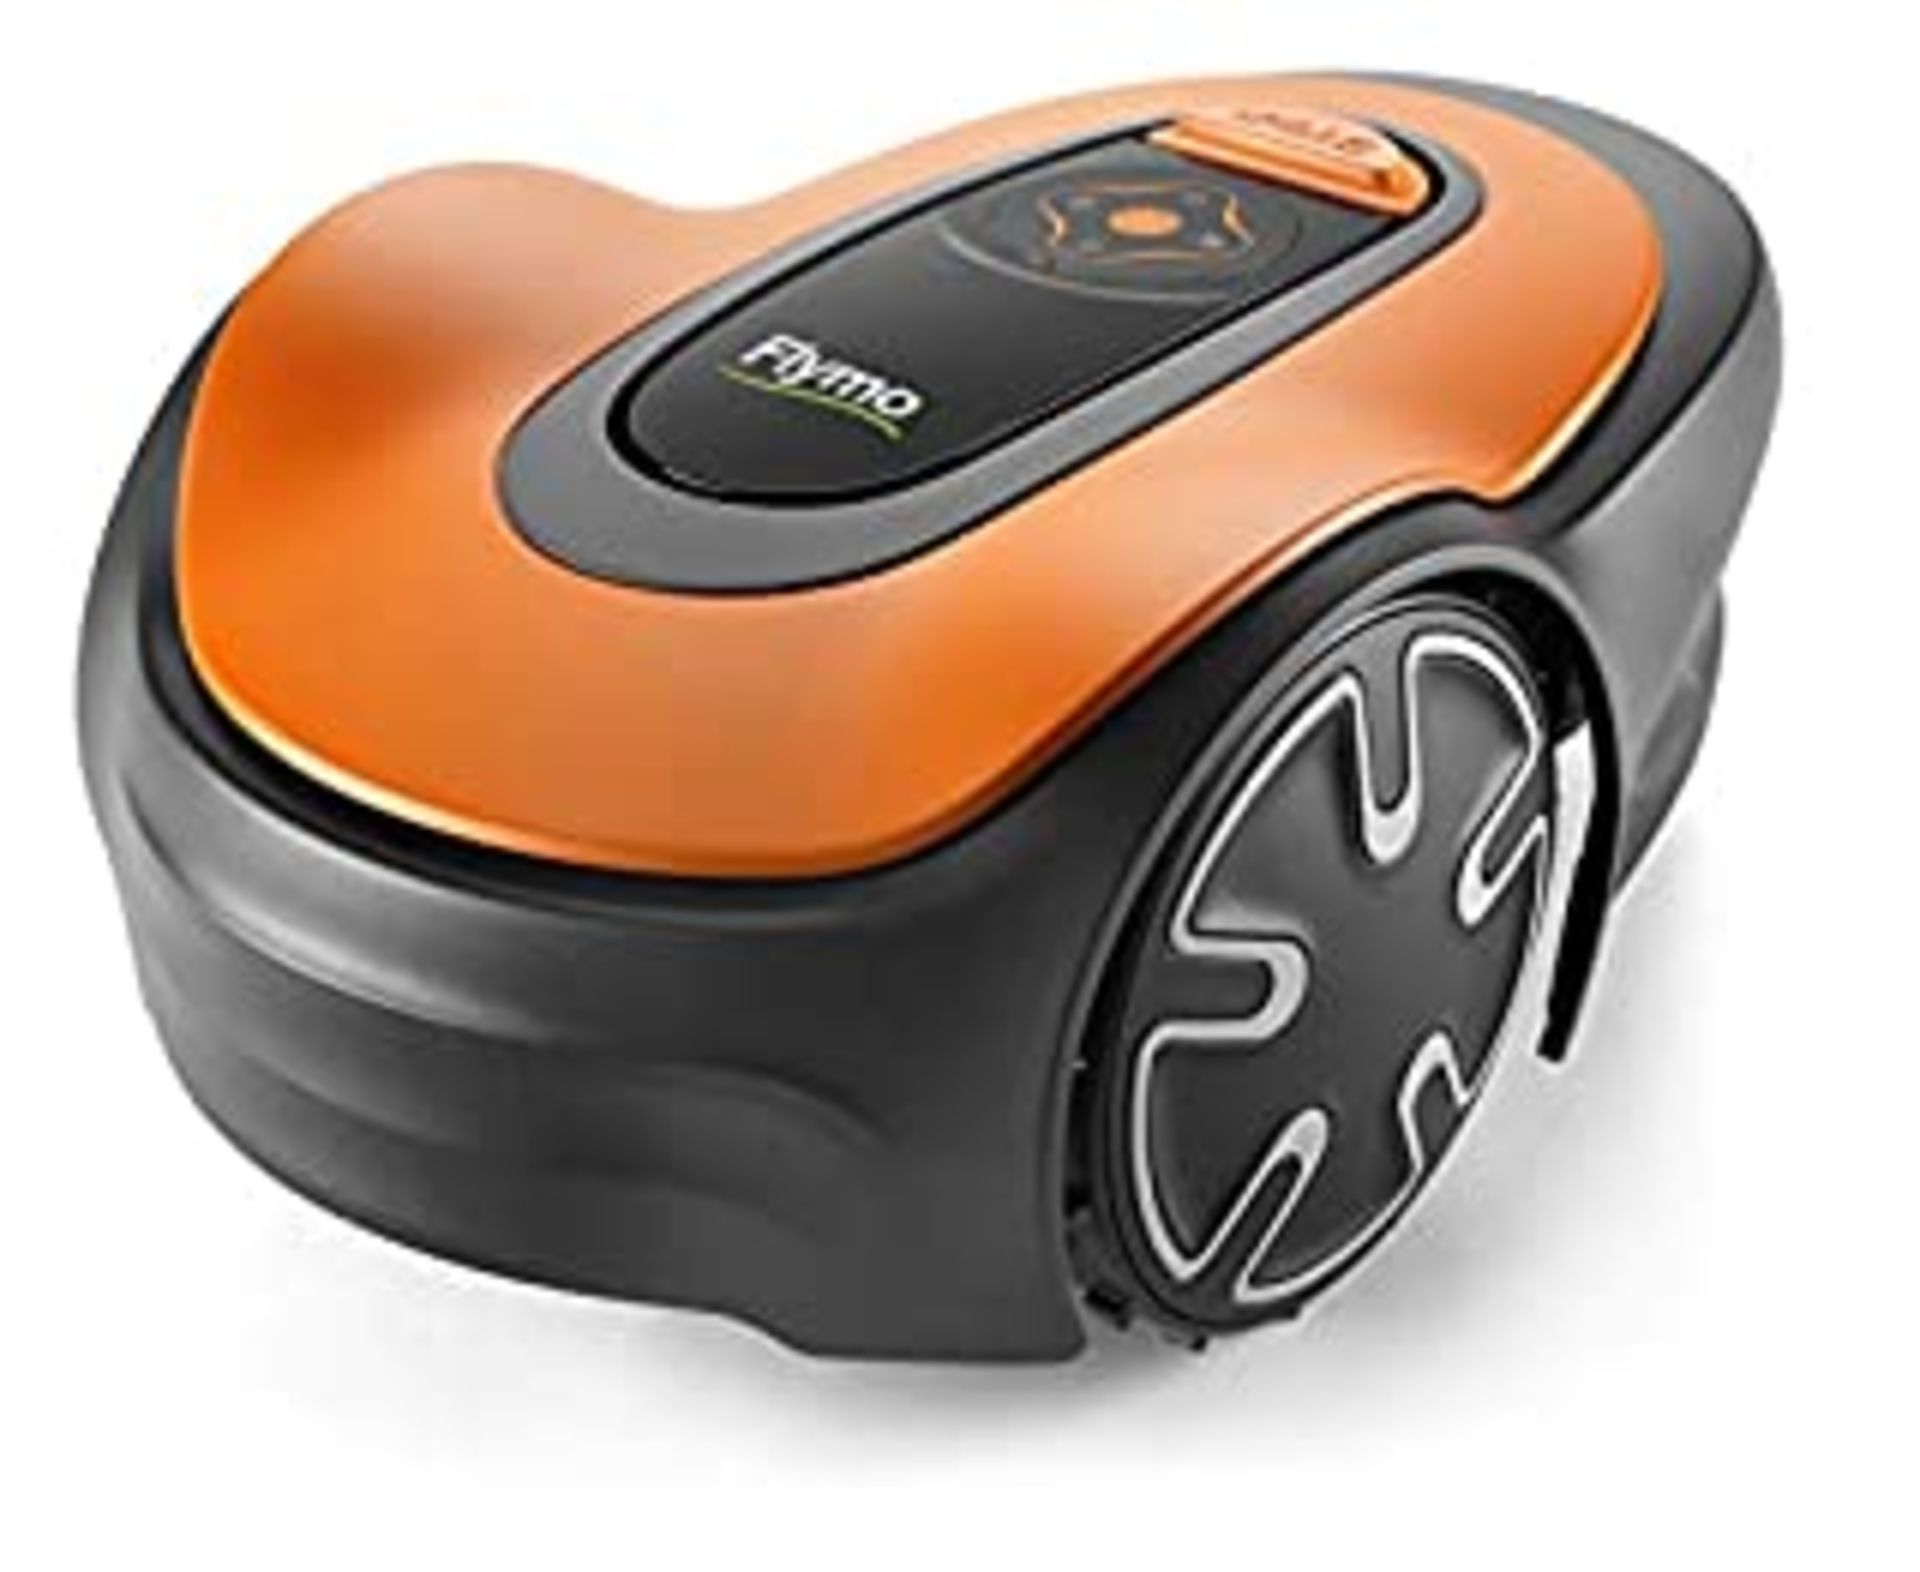 RRP - £700.00 Flymo EasiLife 500 GO Robotic Lawn Mower - Cuts Up to 500 sq m, Ultra Quiet Mowing, Ma